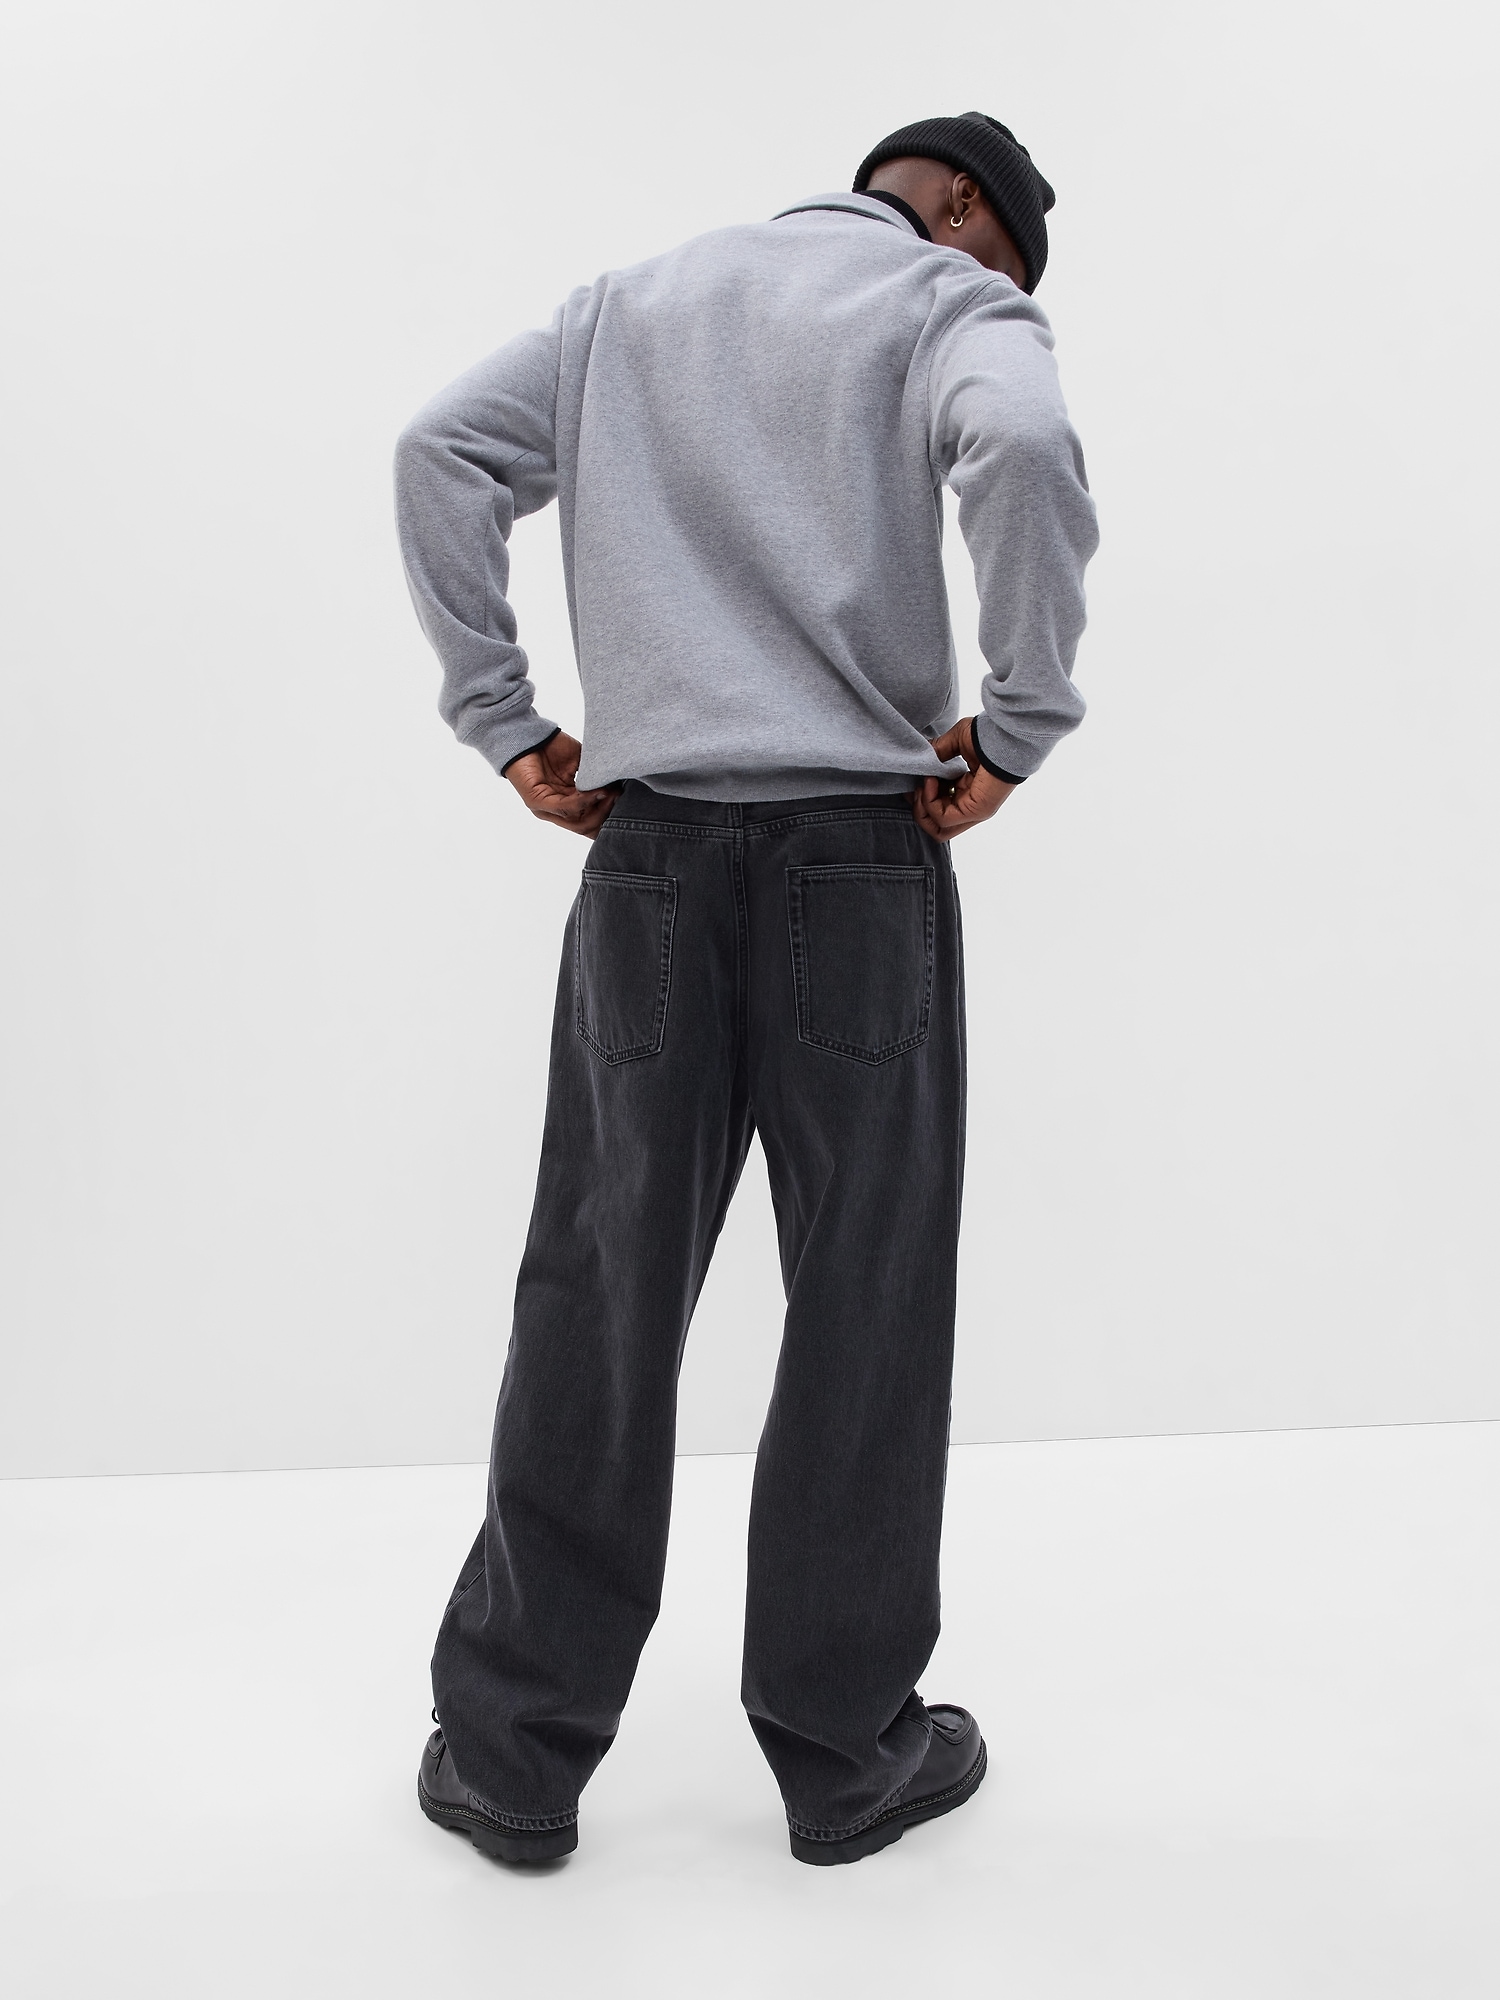 Gap  Jeans outfit men, Tapered jeans men, Mens outfits